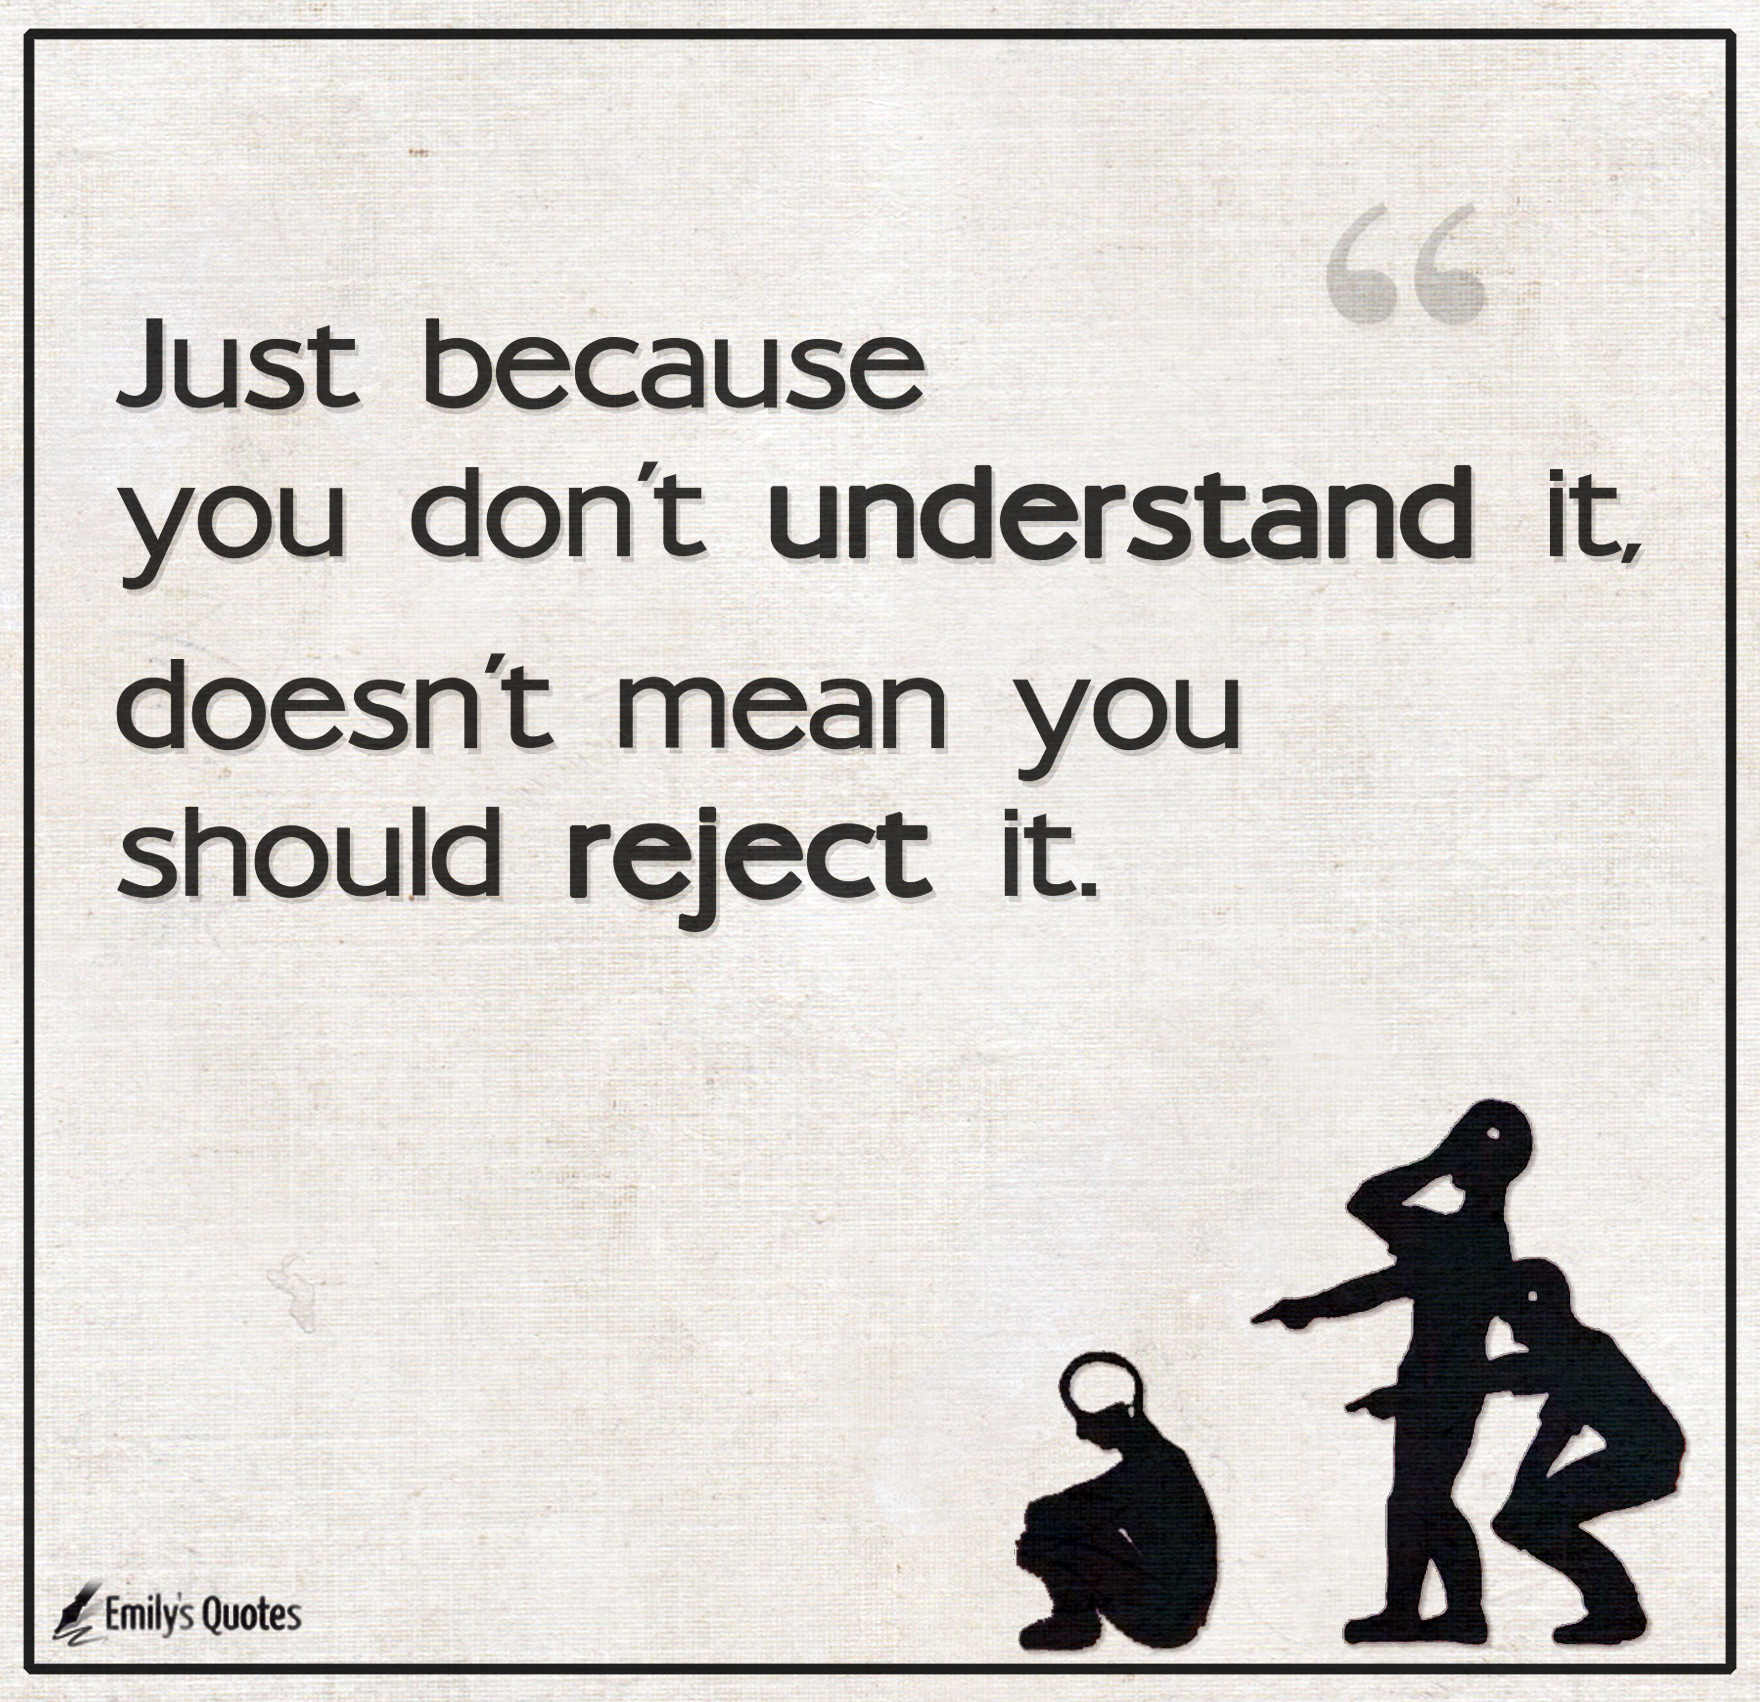 Just because you don’t understand it, doesn’t mean you should reject it